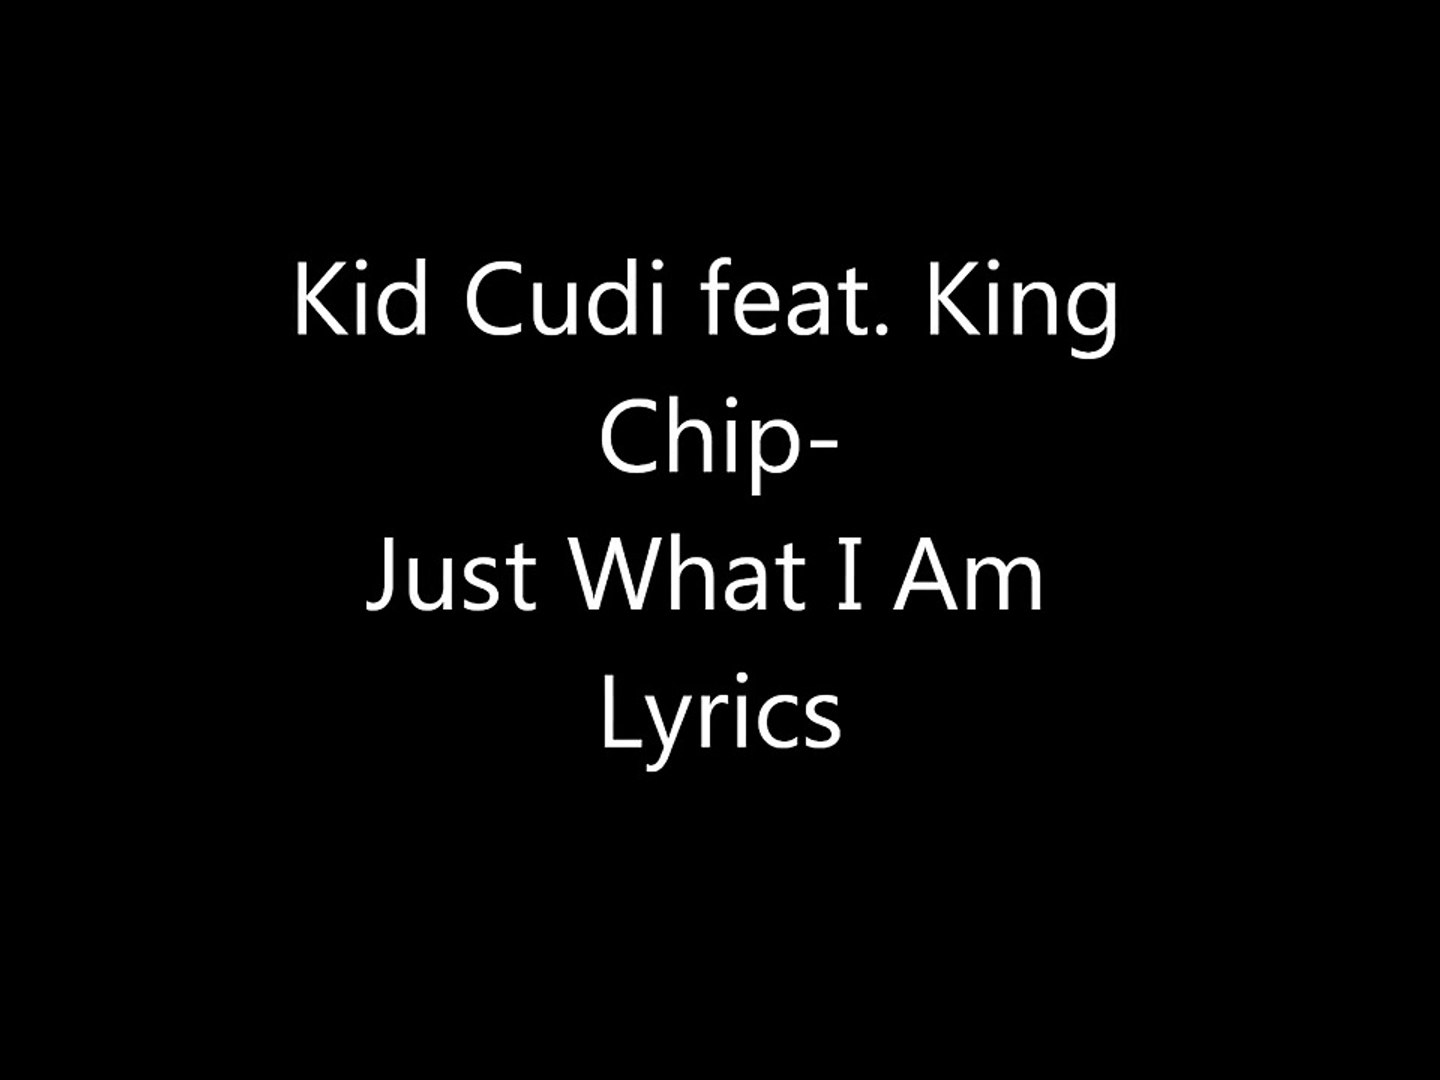 Kid Cudi feat. King Chip - Just What I Am Lyrics - video Dailymotion